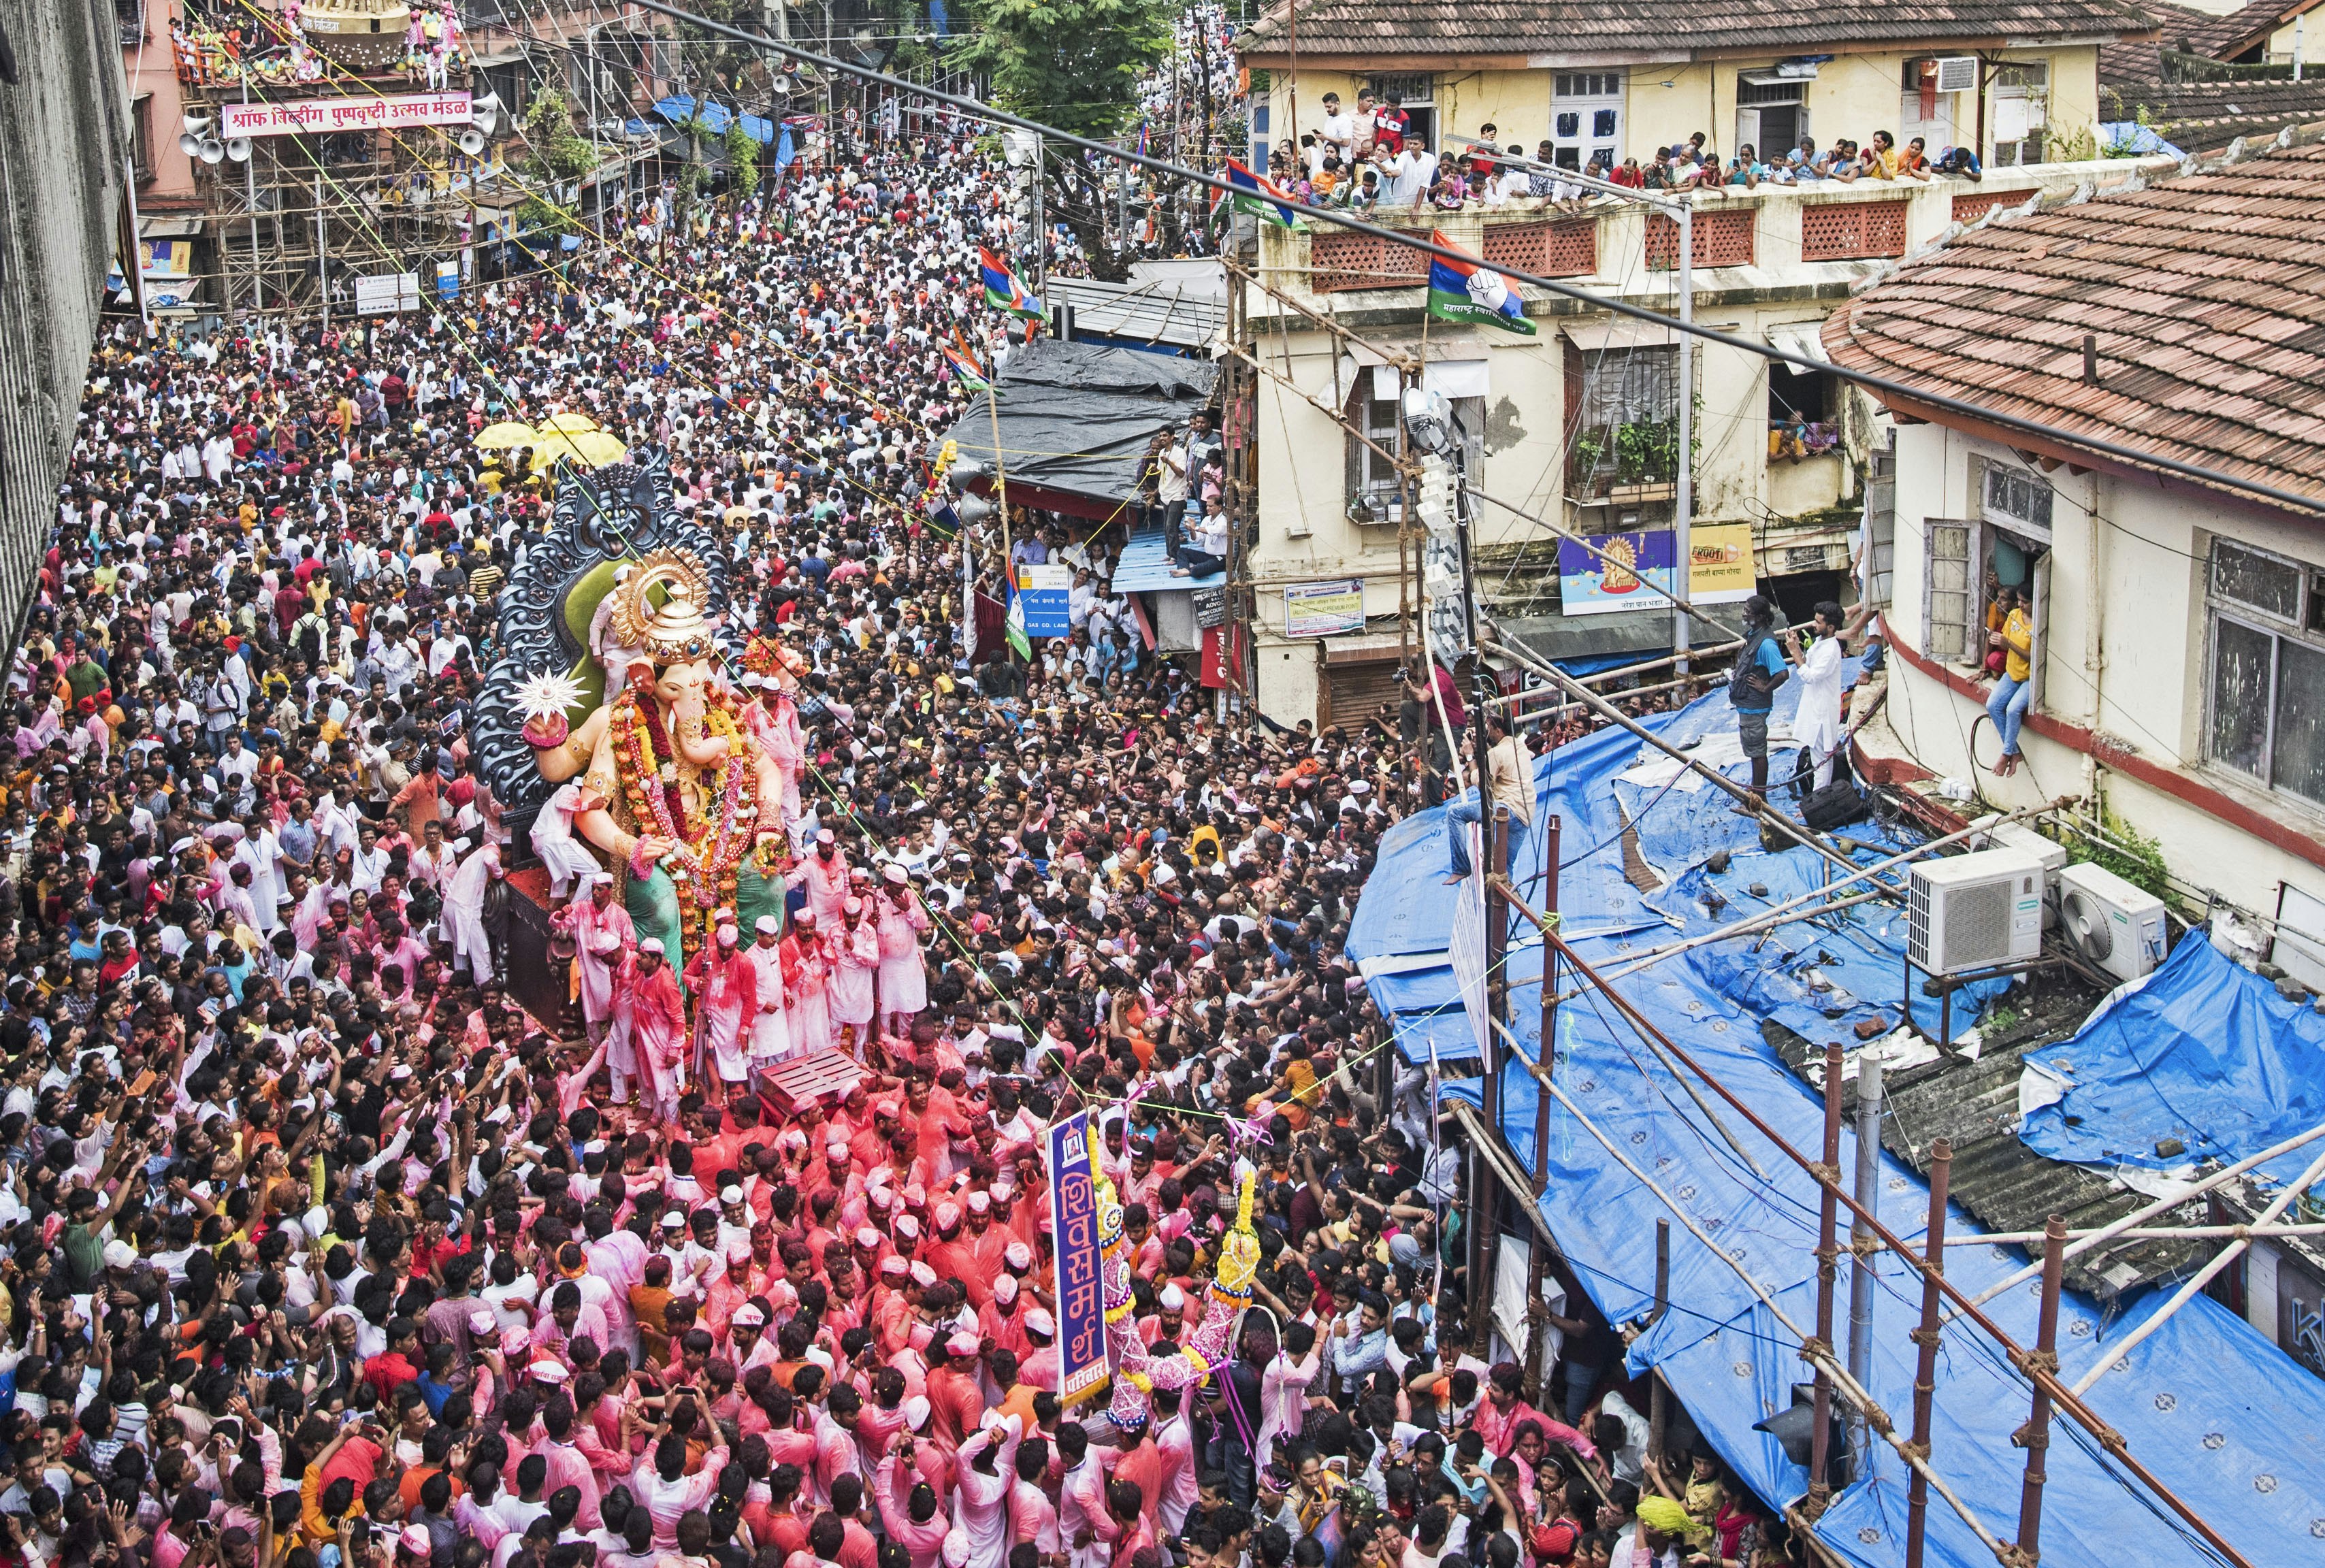 A mammoth crowd floods the streets of Mumbai, surrounding an effigy of Hindu god Ganesh. People also watch on from windows and rooftops.